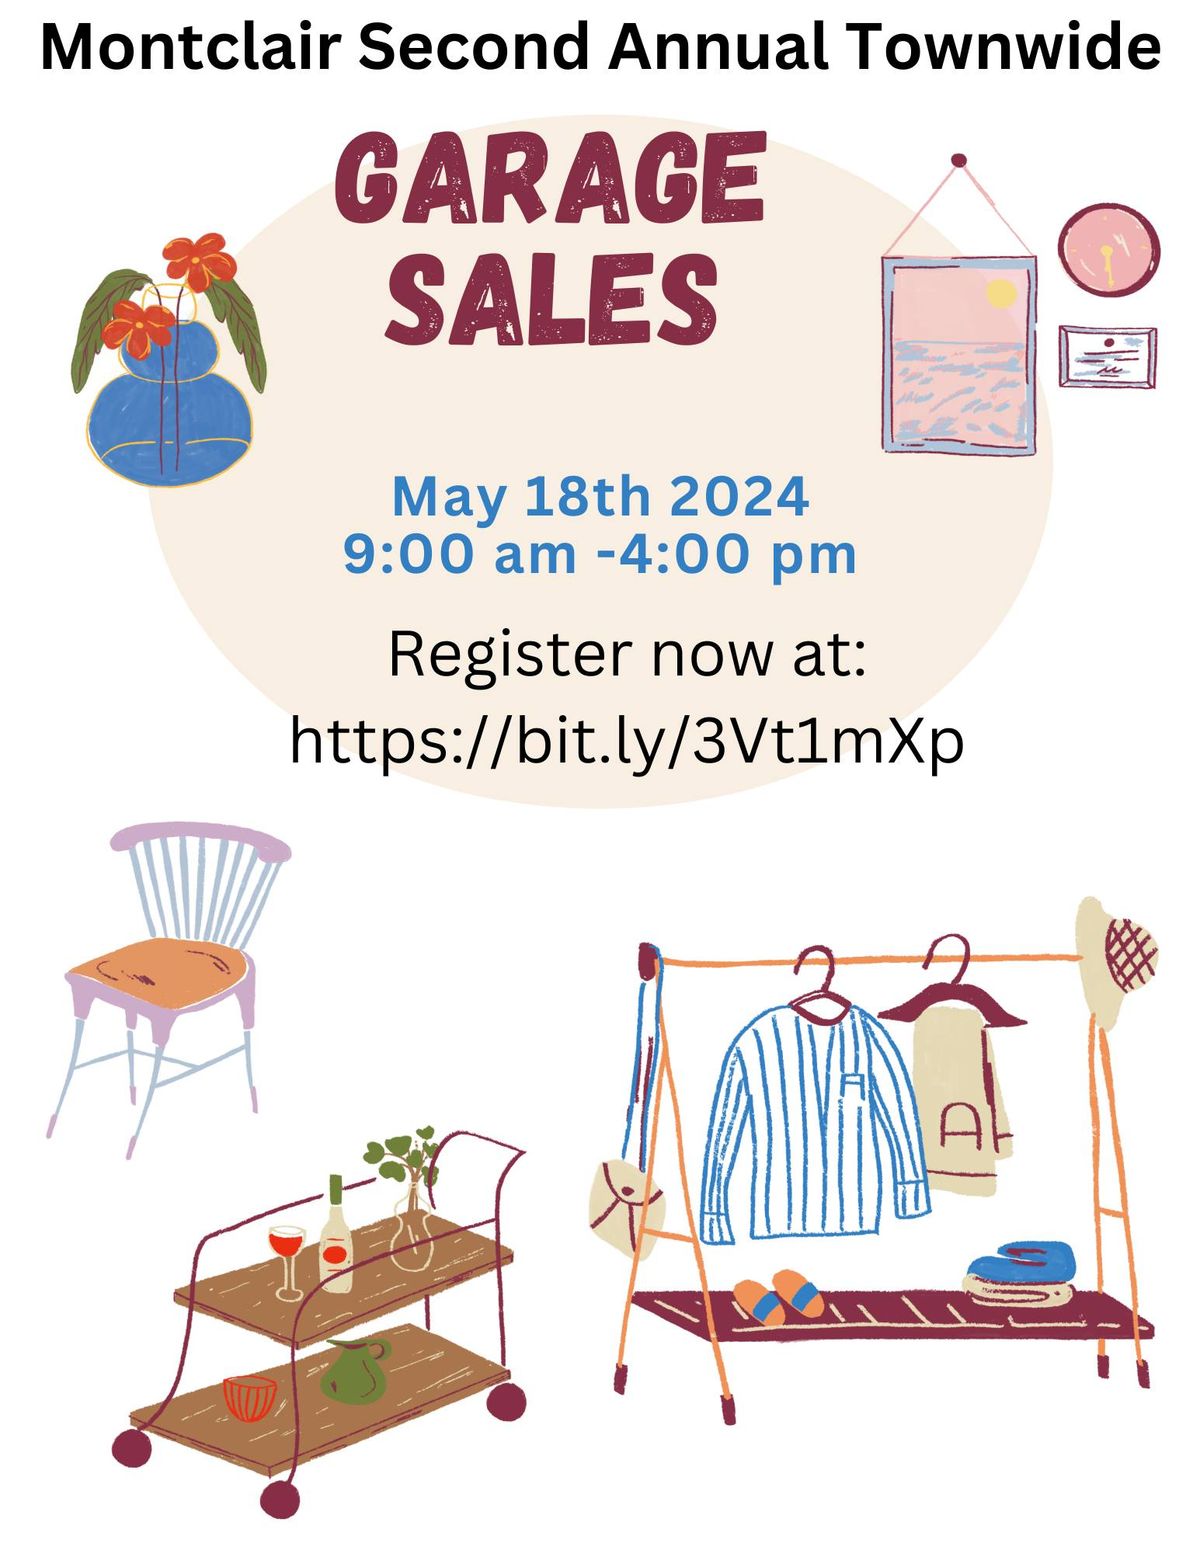 Montclair Second Annual Townwide Garage Sale